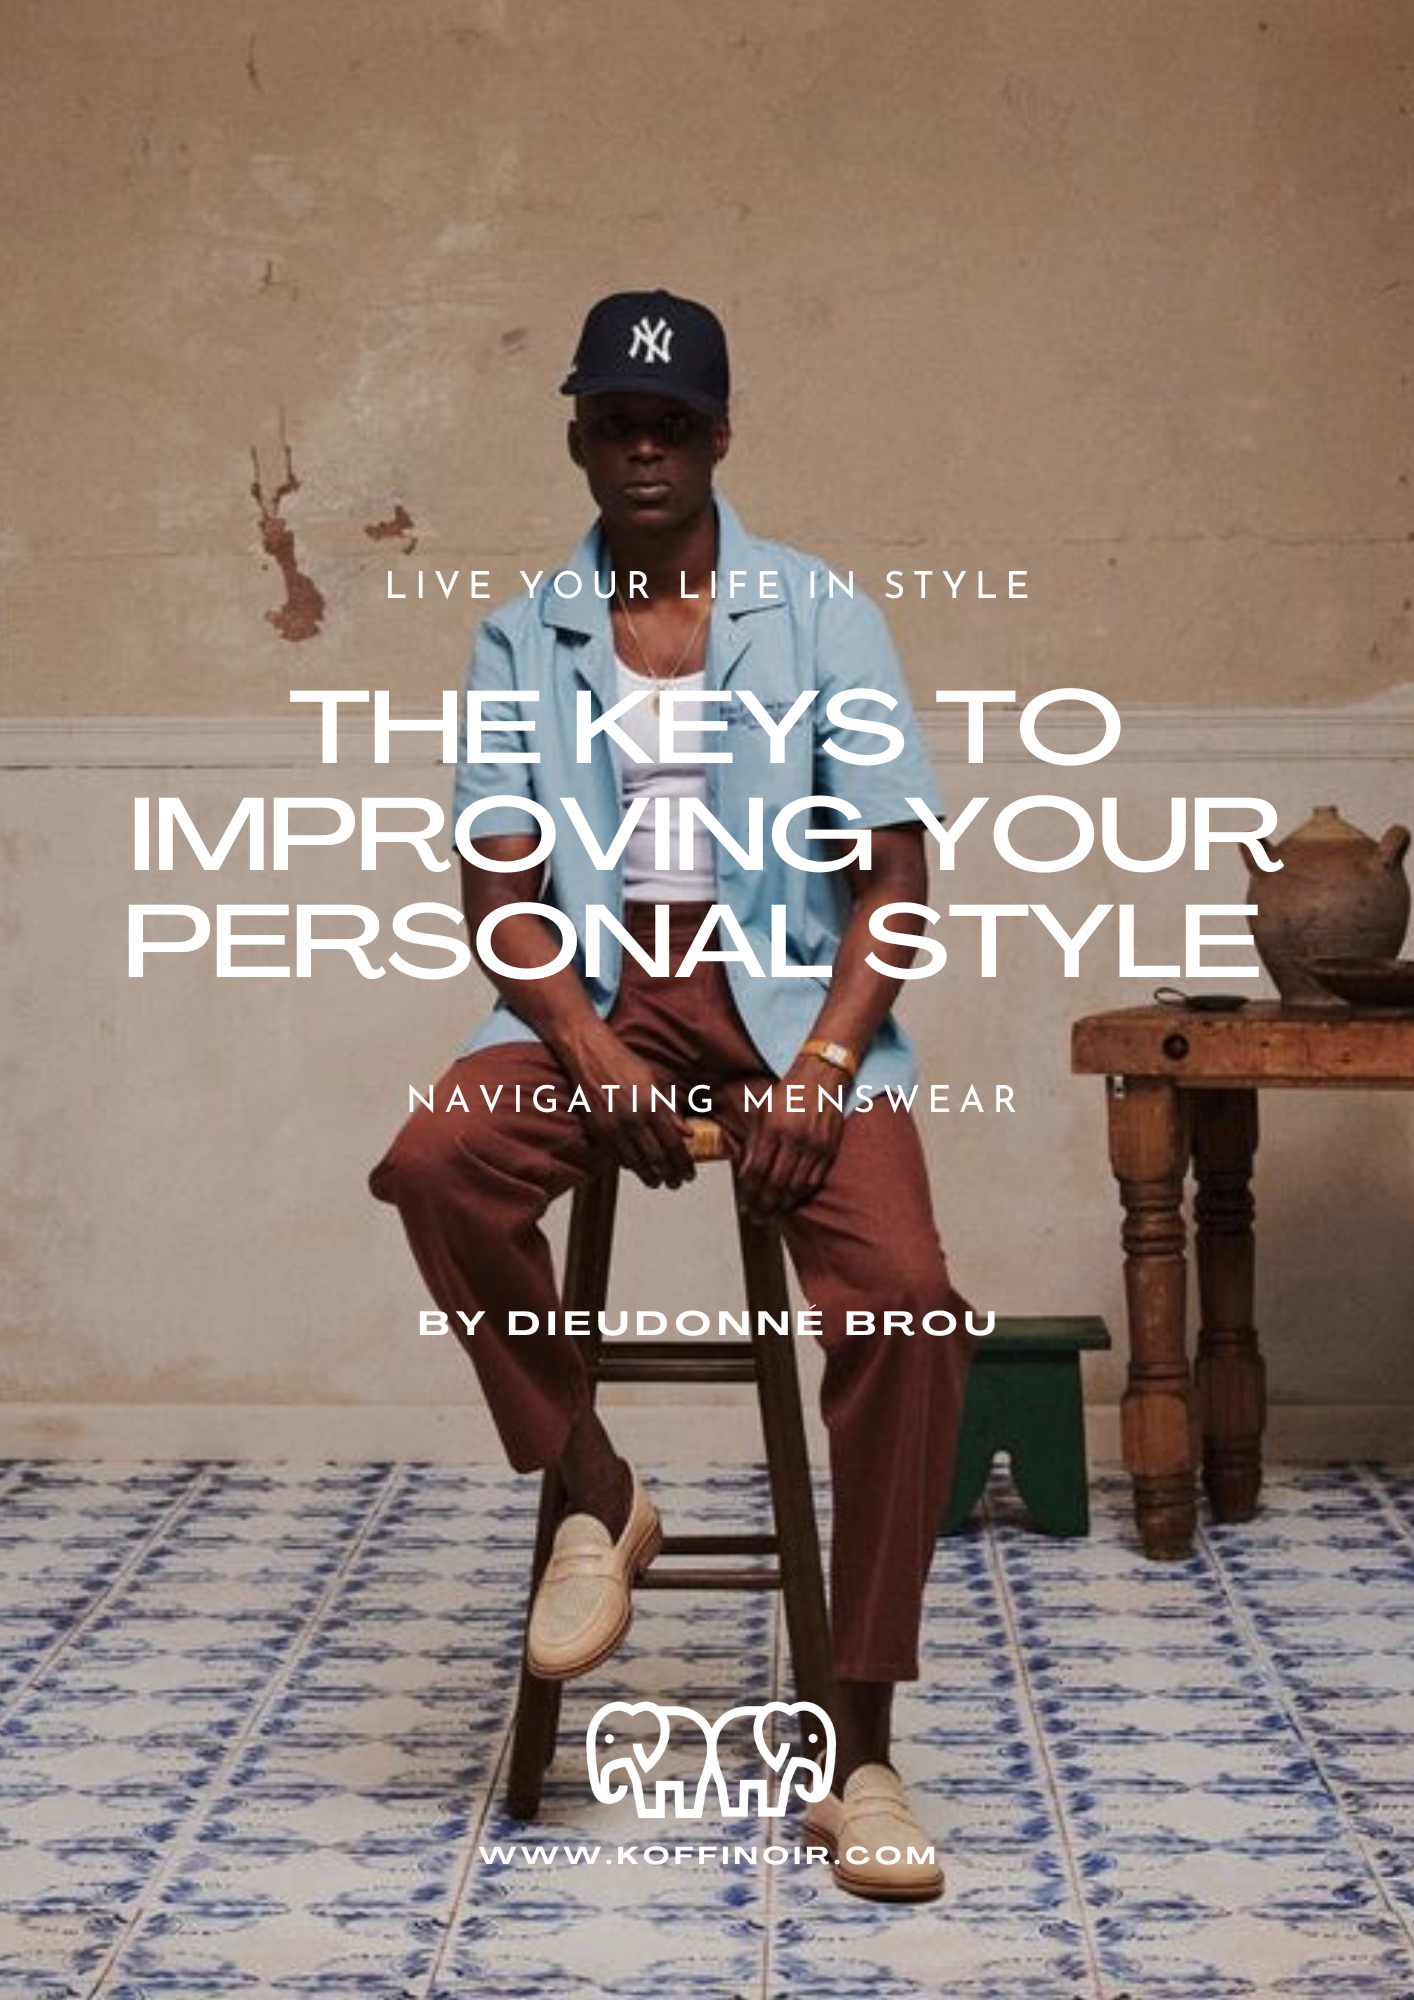 Live your Life in Style "The Keys to Improving your Personal Style" Navigating Menswear